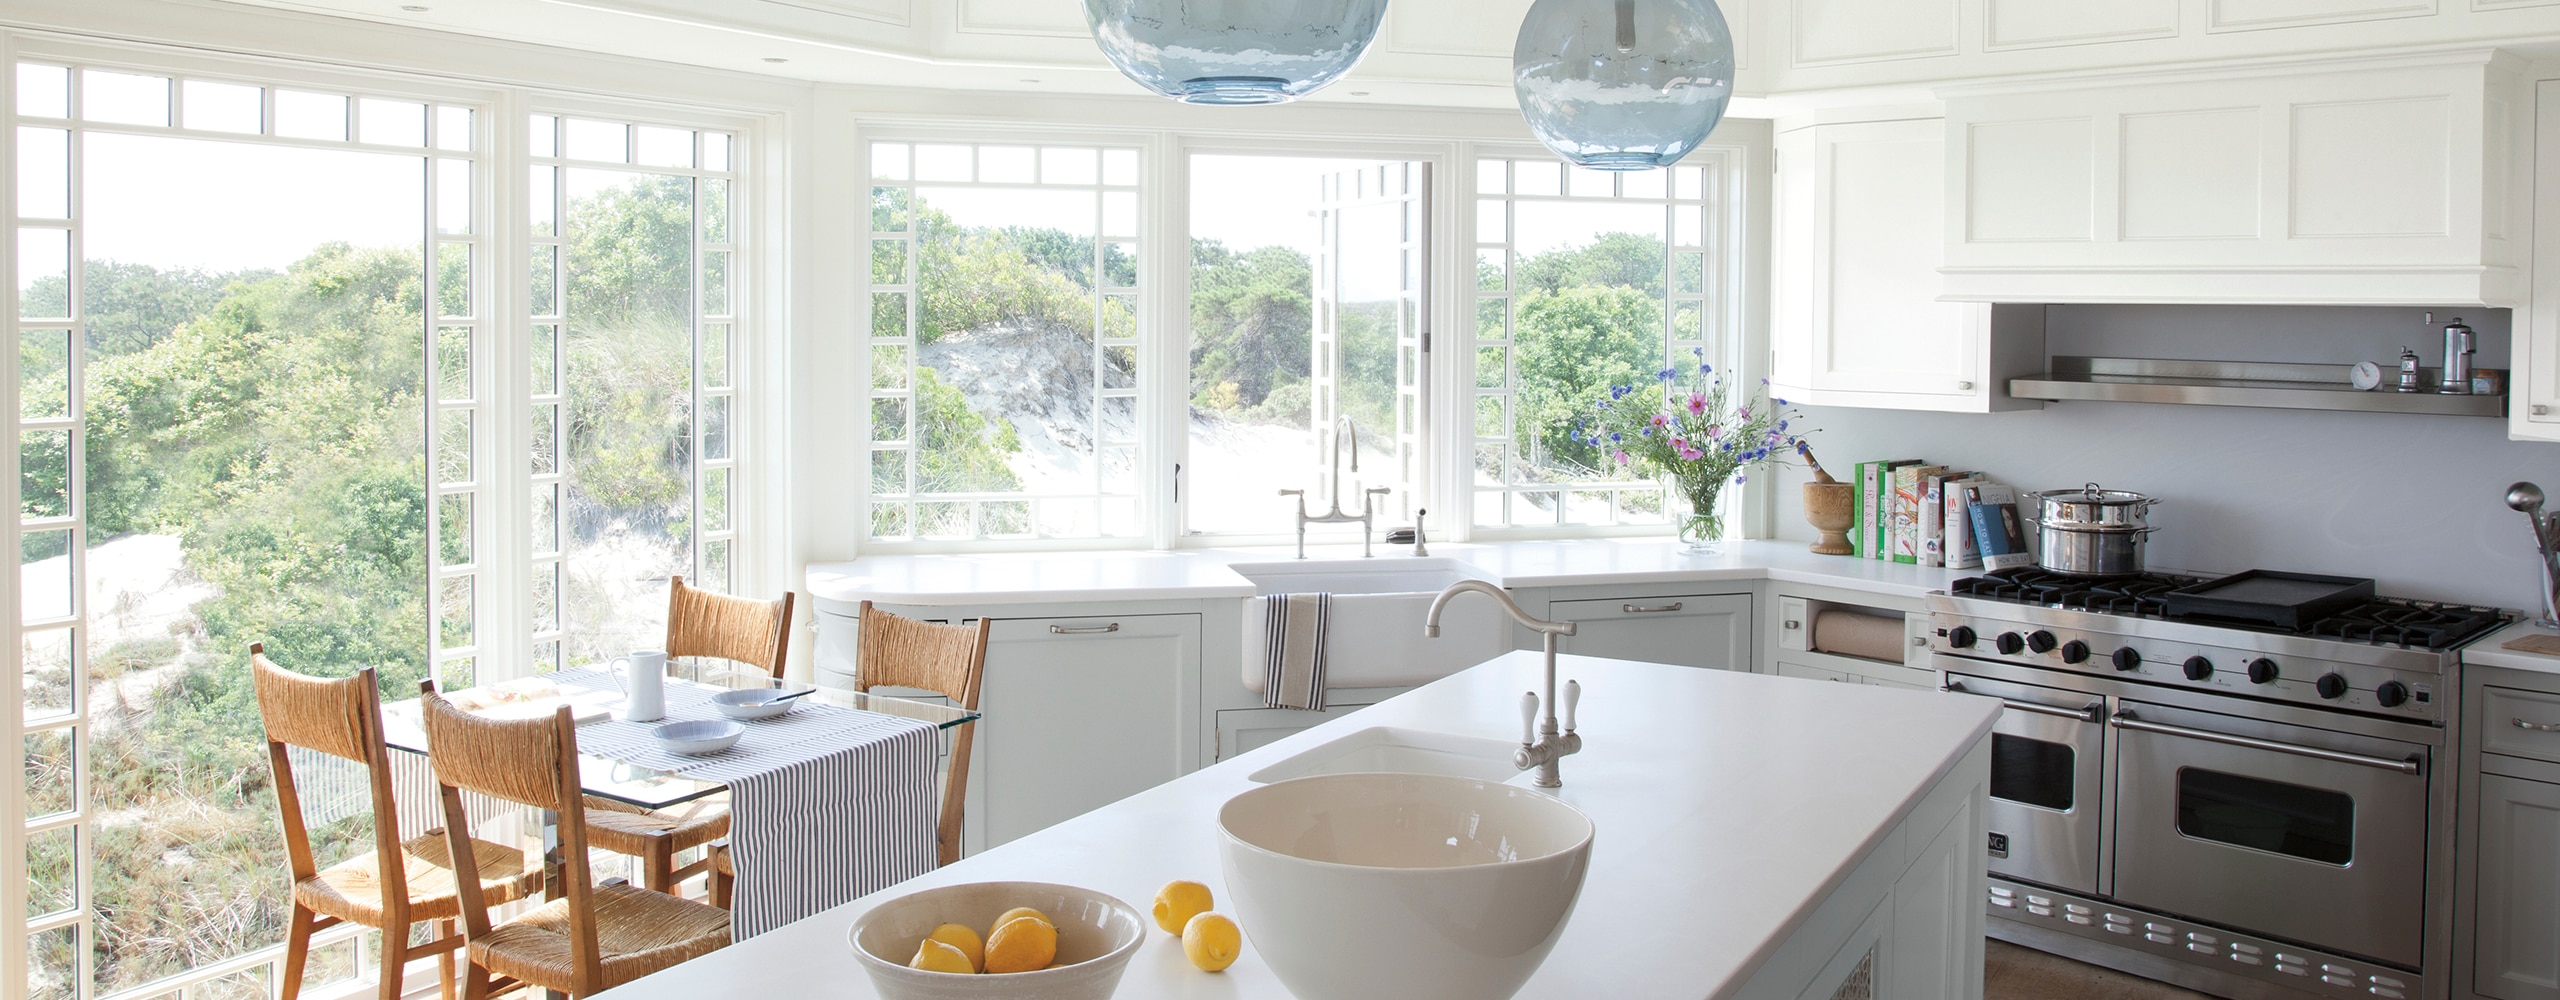 Bright, airy kitchen with centre island and cliffside view, off-white-painted walls, and a light blue-painted ceiling.